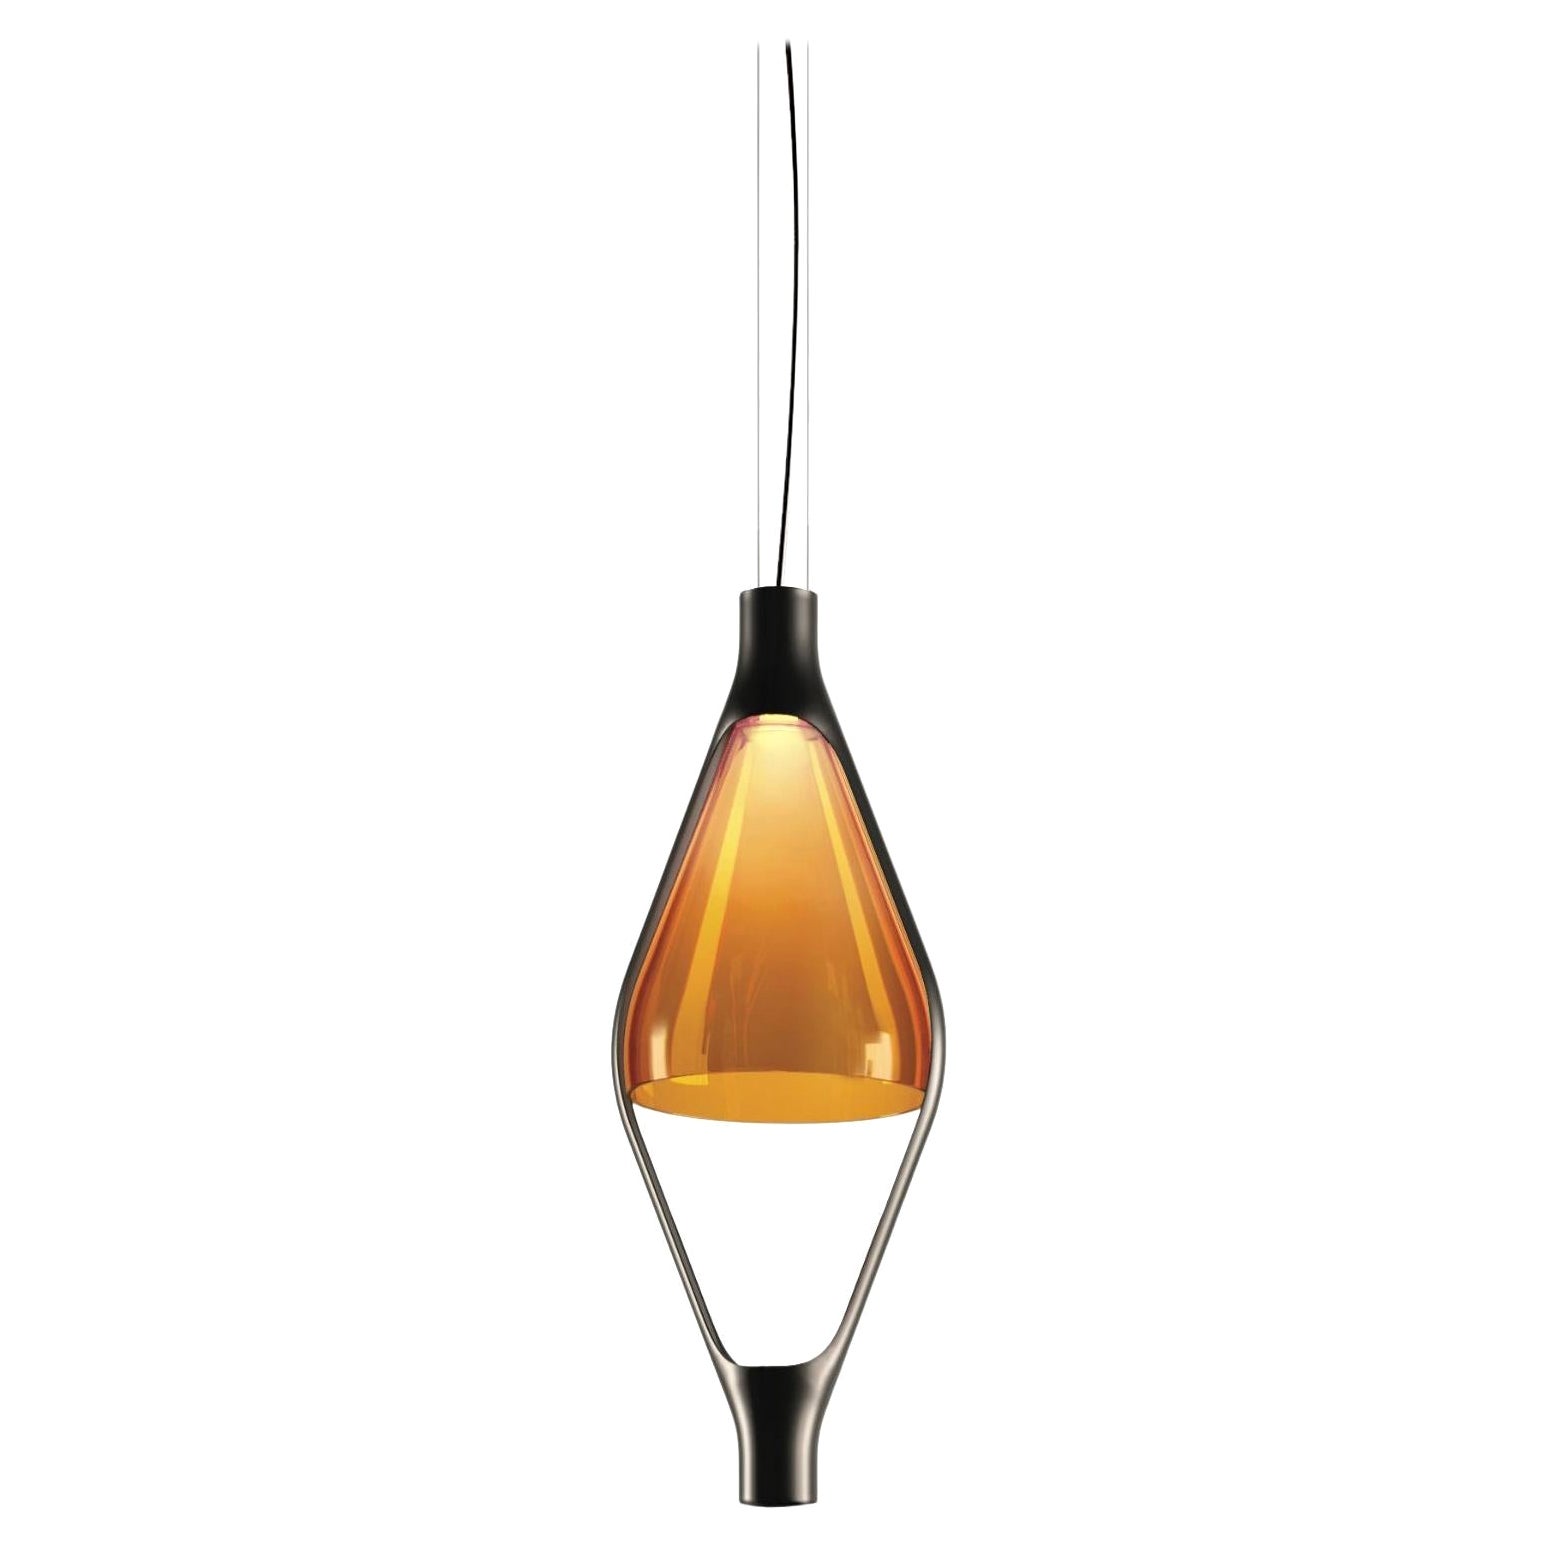 'Viceversa' Modular Suspension Lamp by Noé Lawrance for Kdln in Amber For Sale